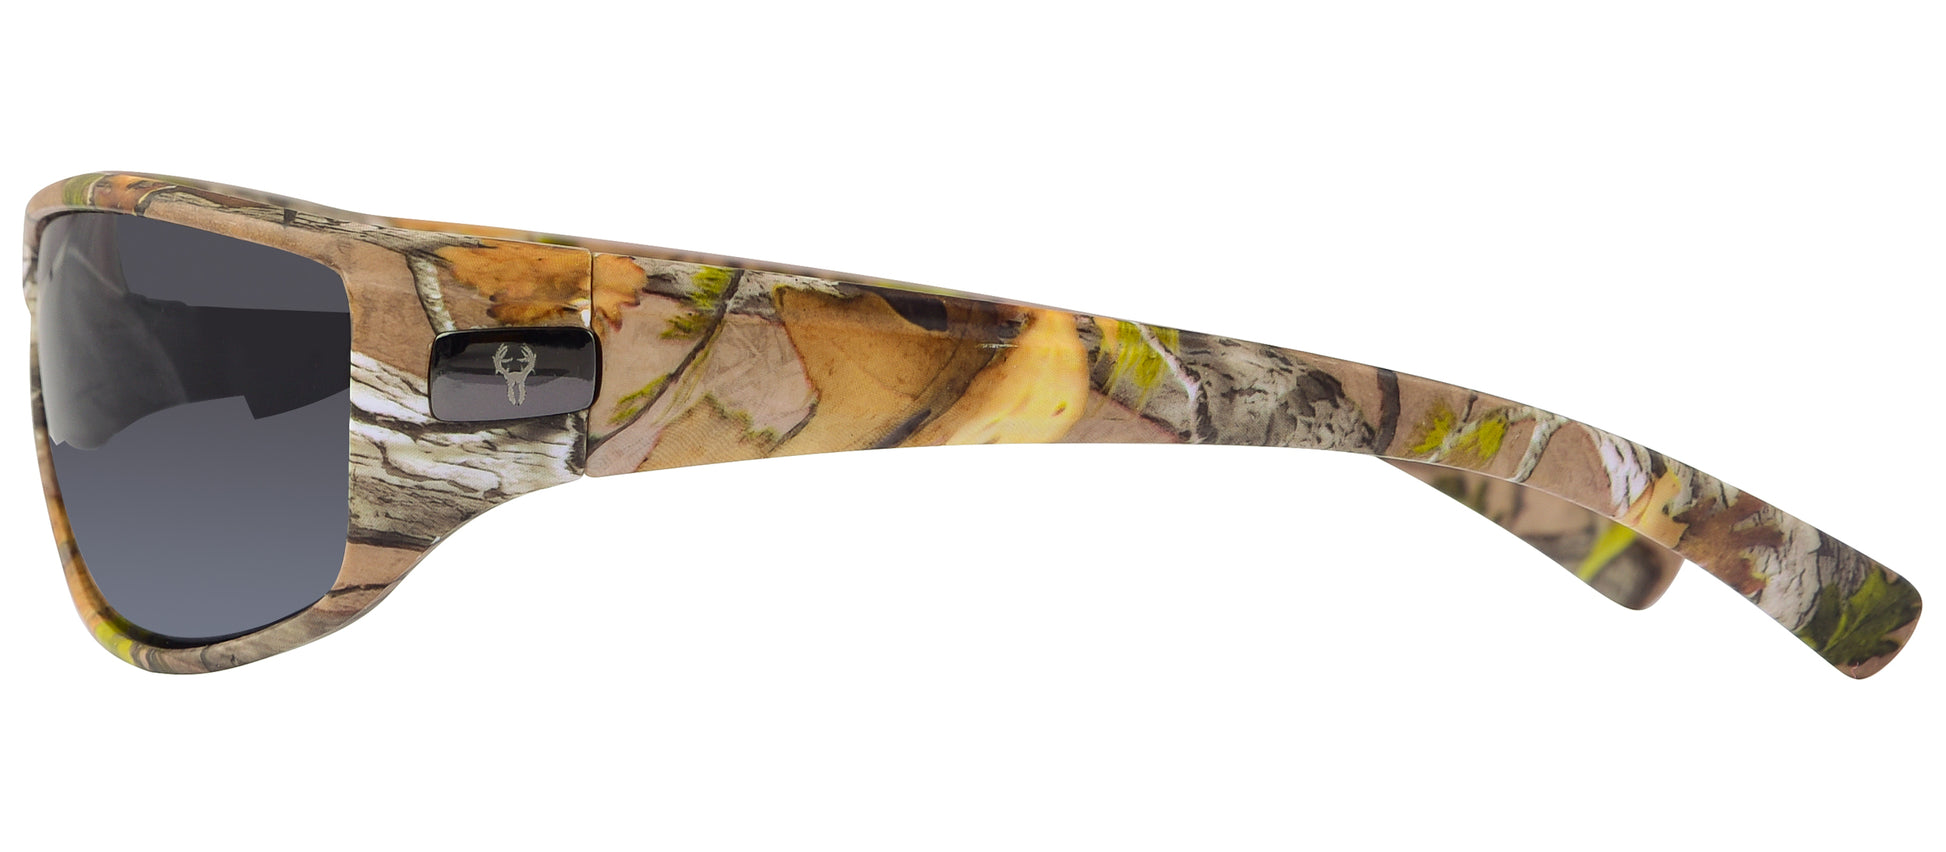 Second image: Hornz Brown Forest Camouflage Polarized Sunglasses for Men - WhiteTail - Free Matching Microfiber Pouch - Brown Camo Frame - Smoke Lens